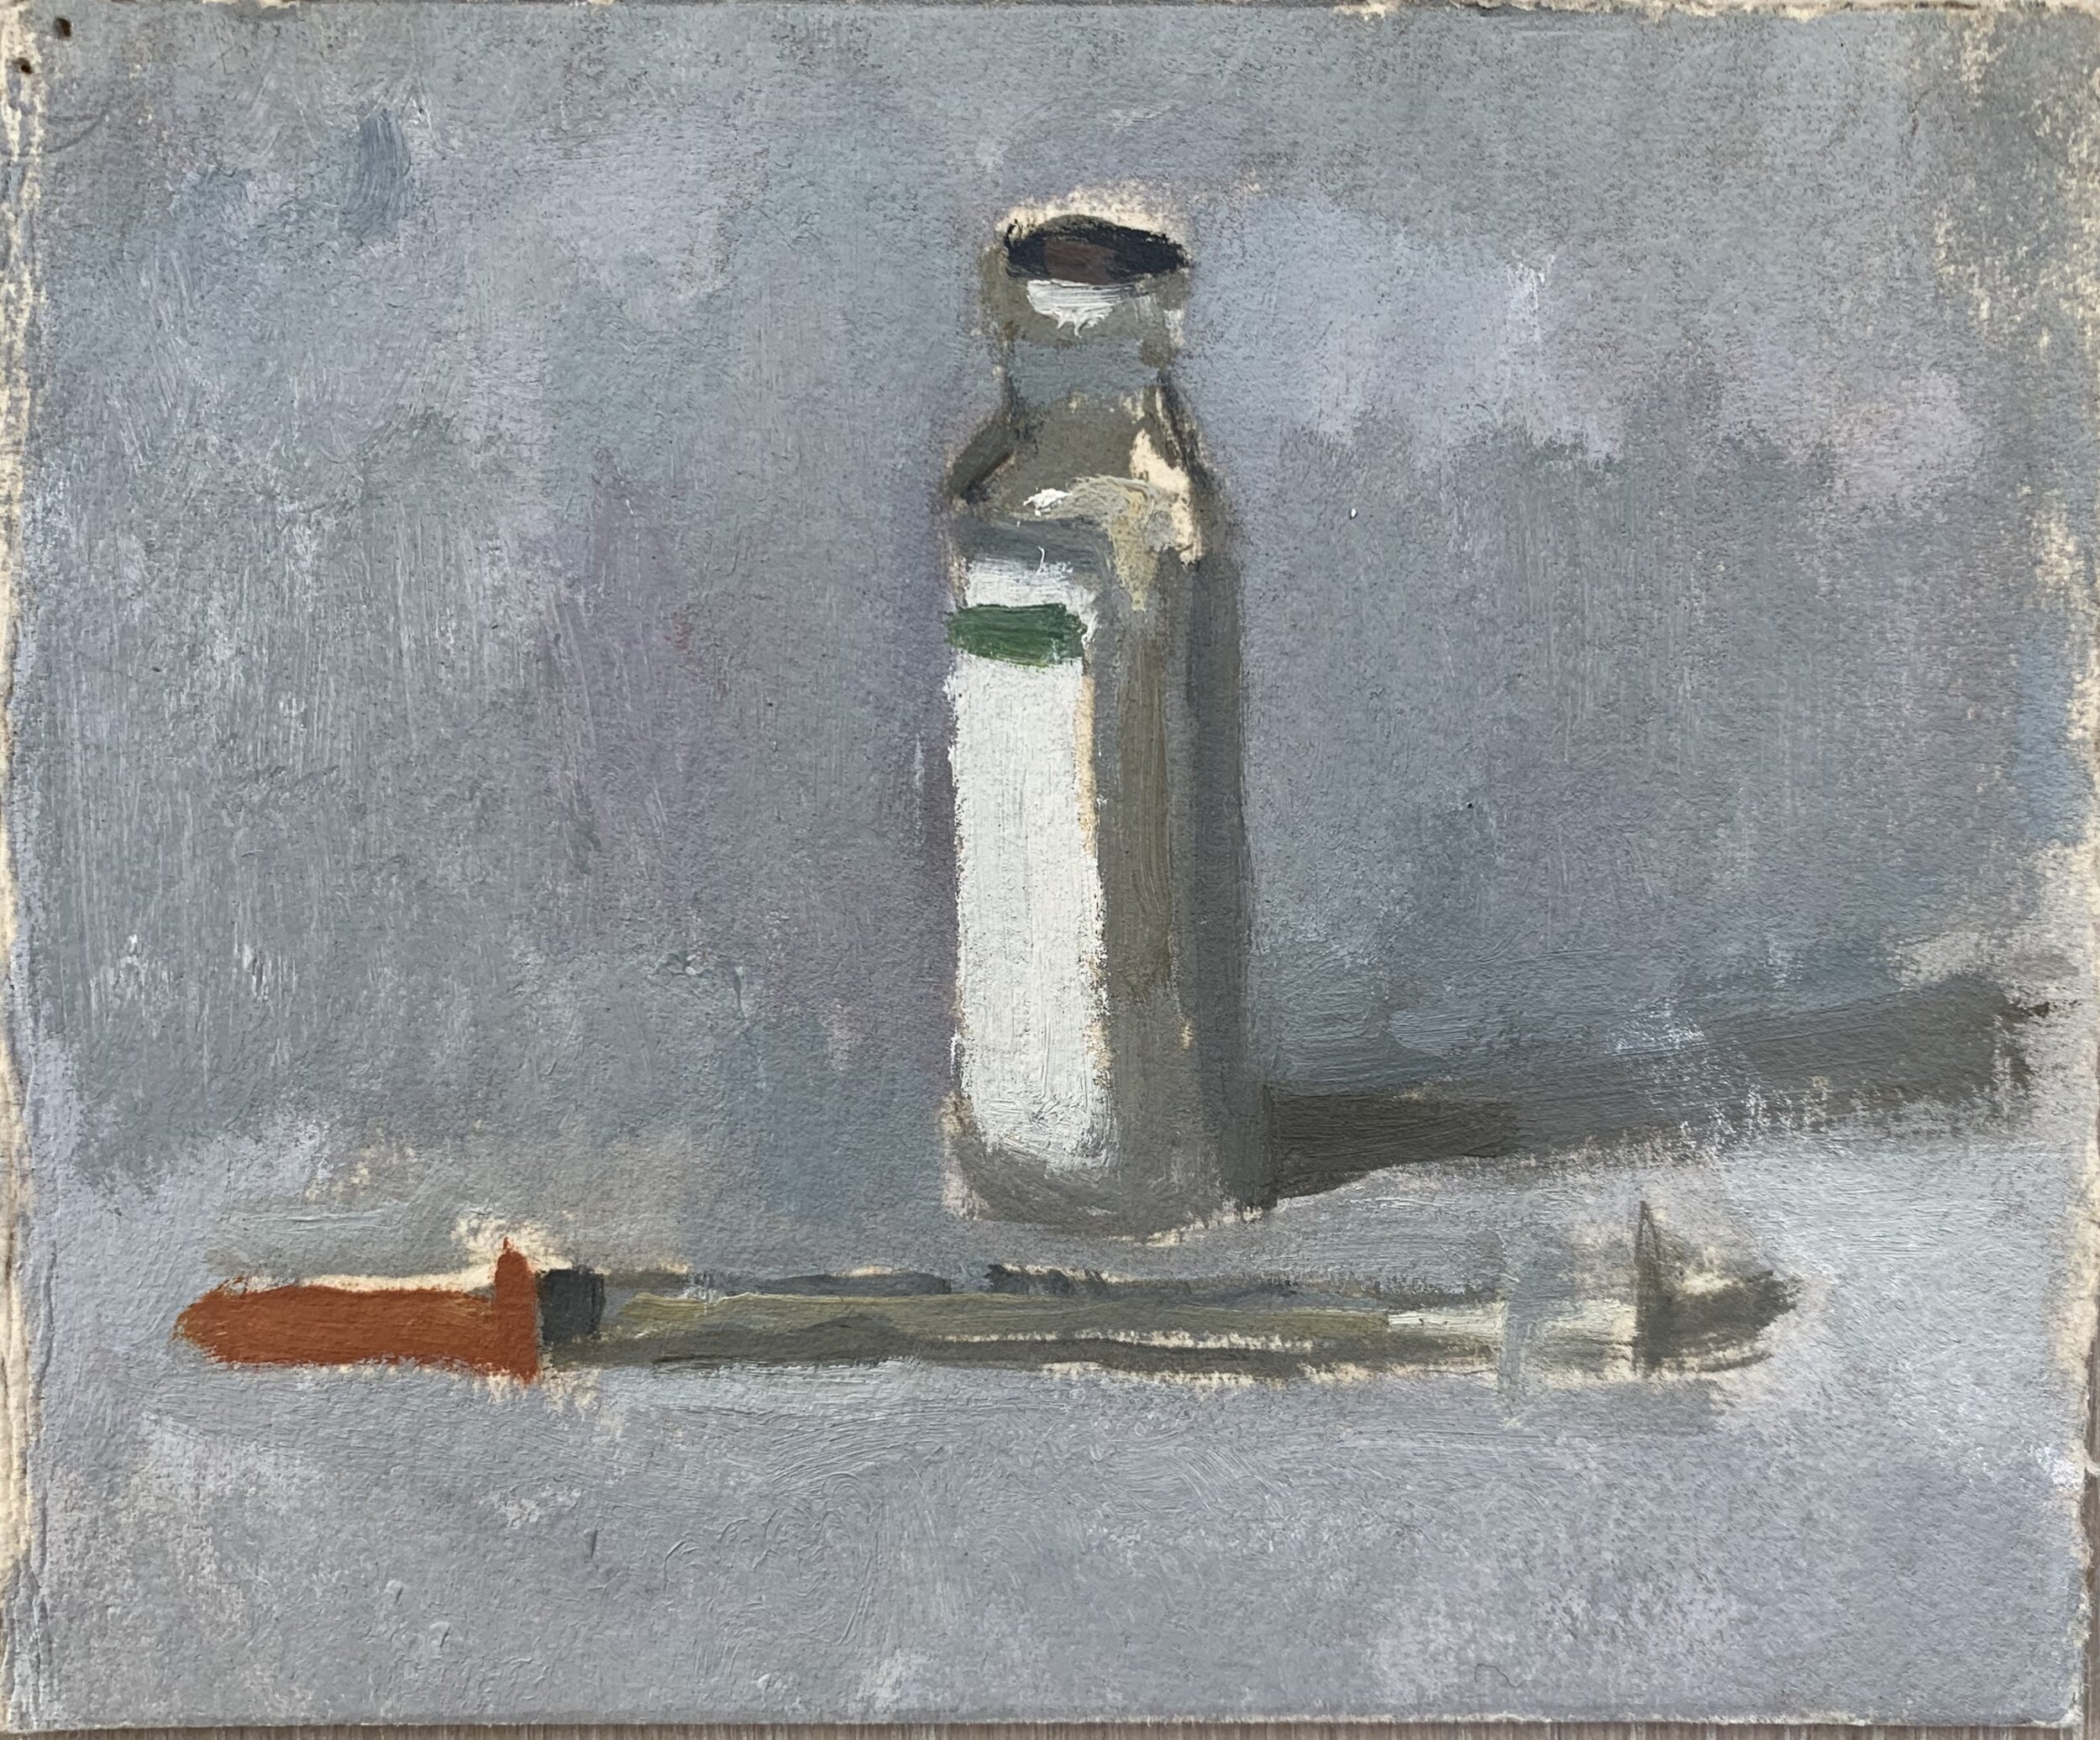 Insulin and syringe (Copy)